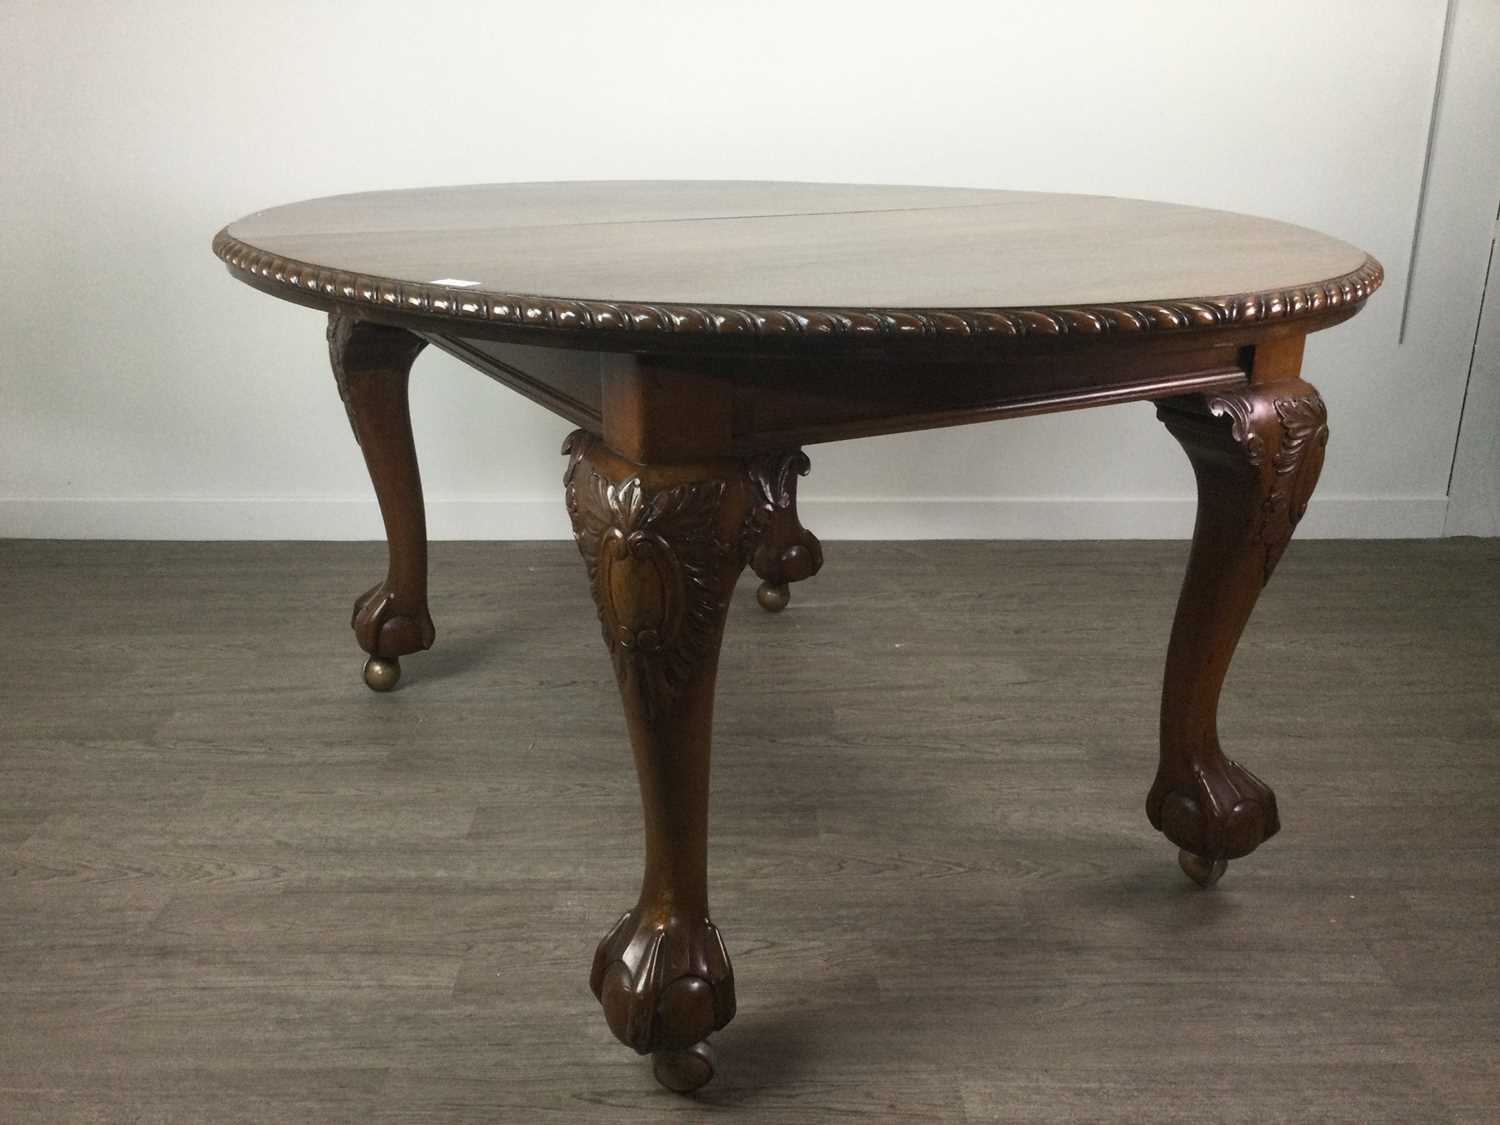 Lot 1371 - A MAHOGANY DINING TABLE OF CHIPPENDALE DESIGN